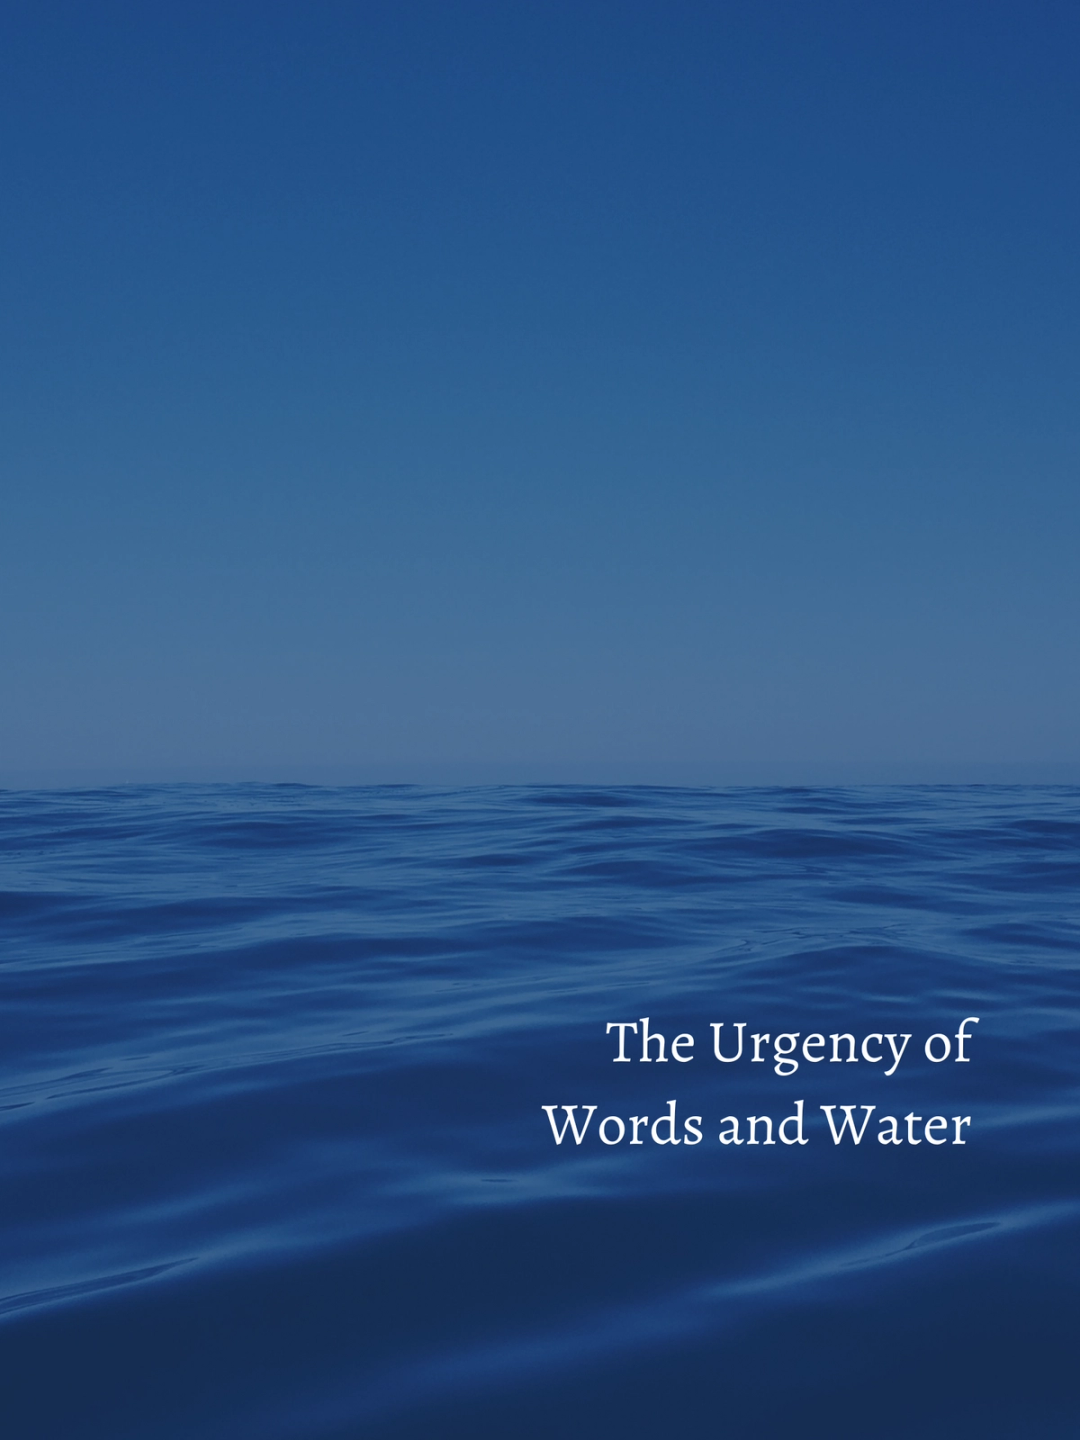 The Urgency of Words and Water | Ubuntu Experience